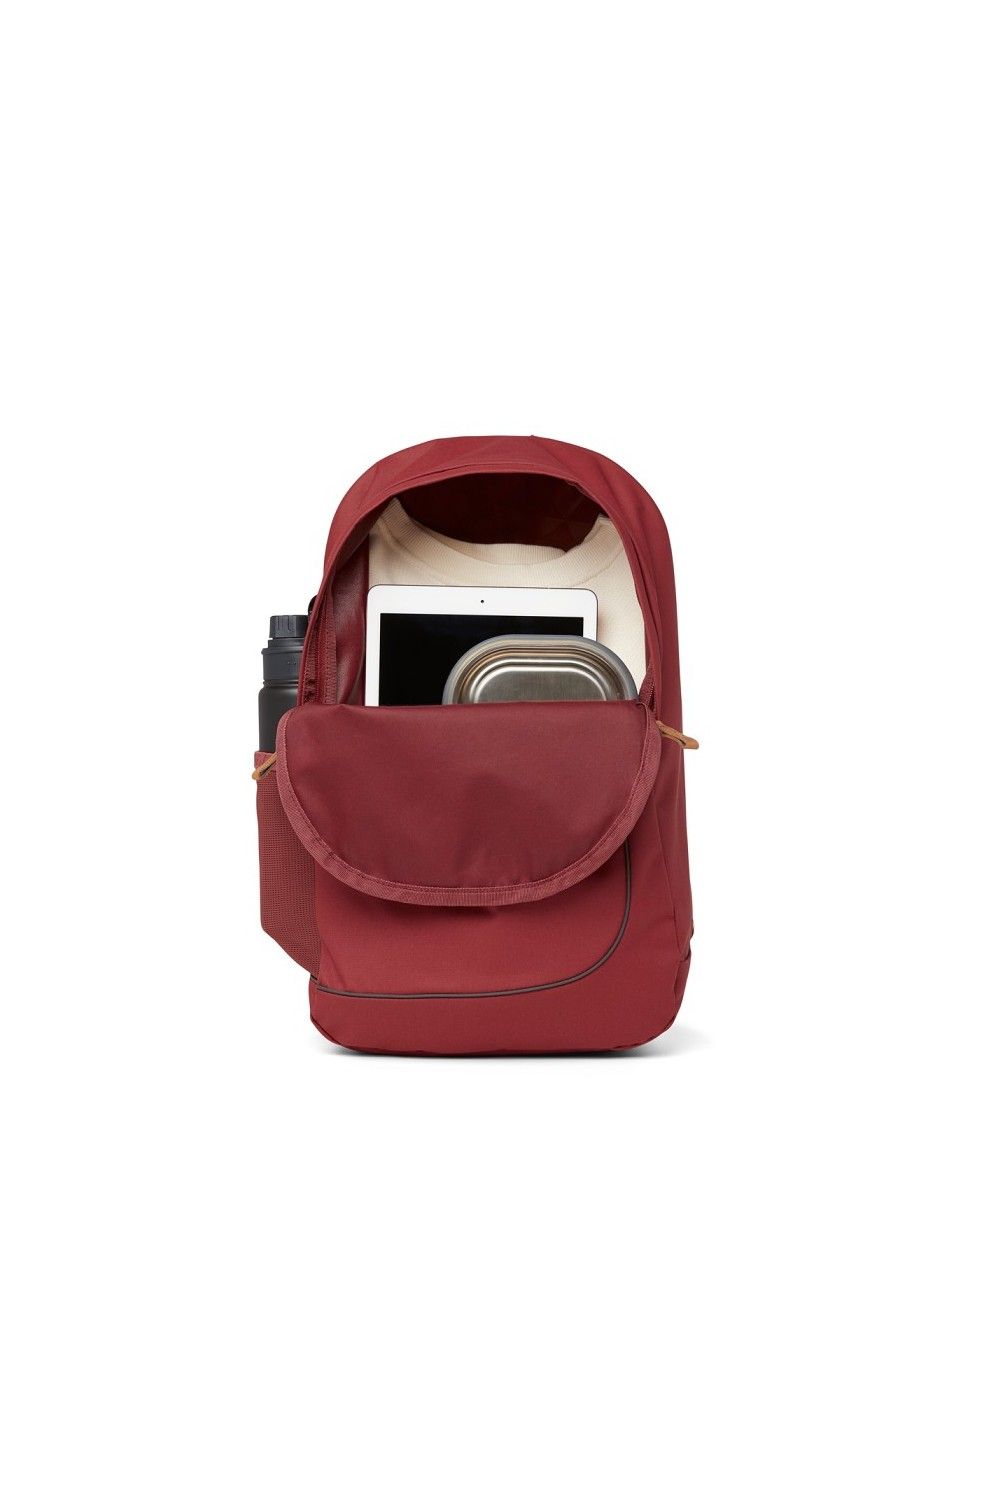 Satch Backpack Fly Nordic Red